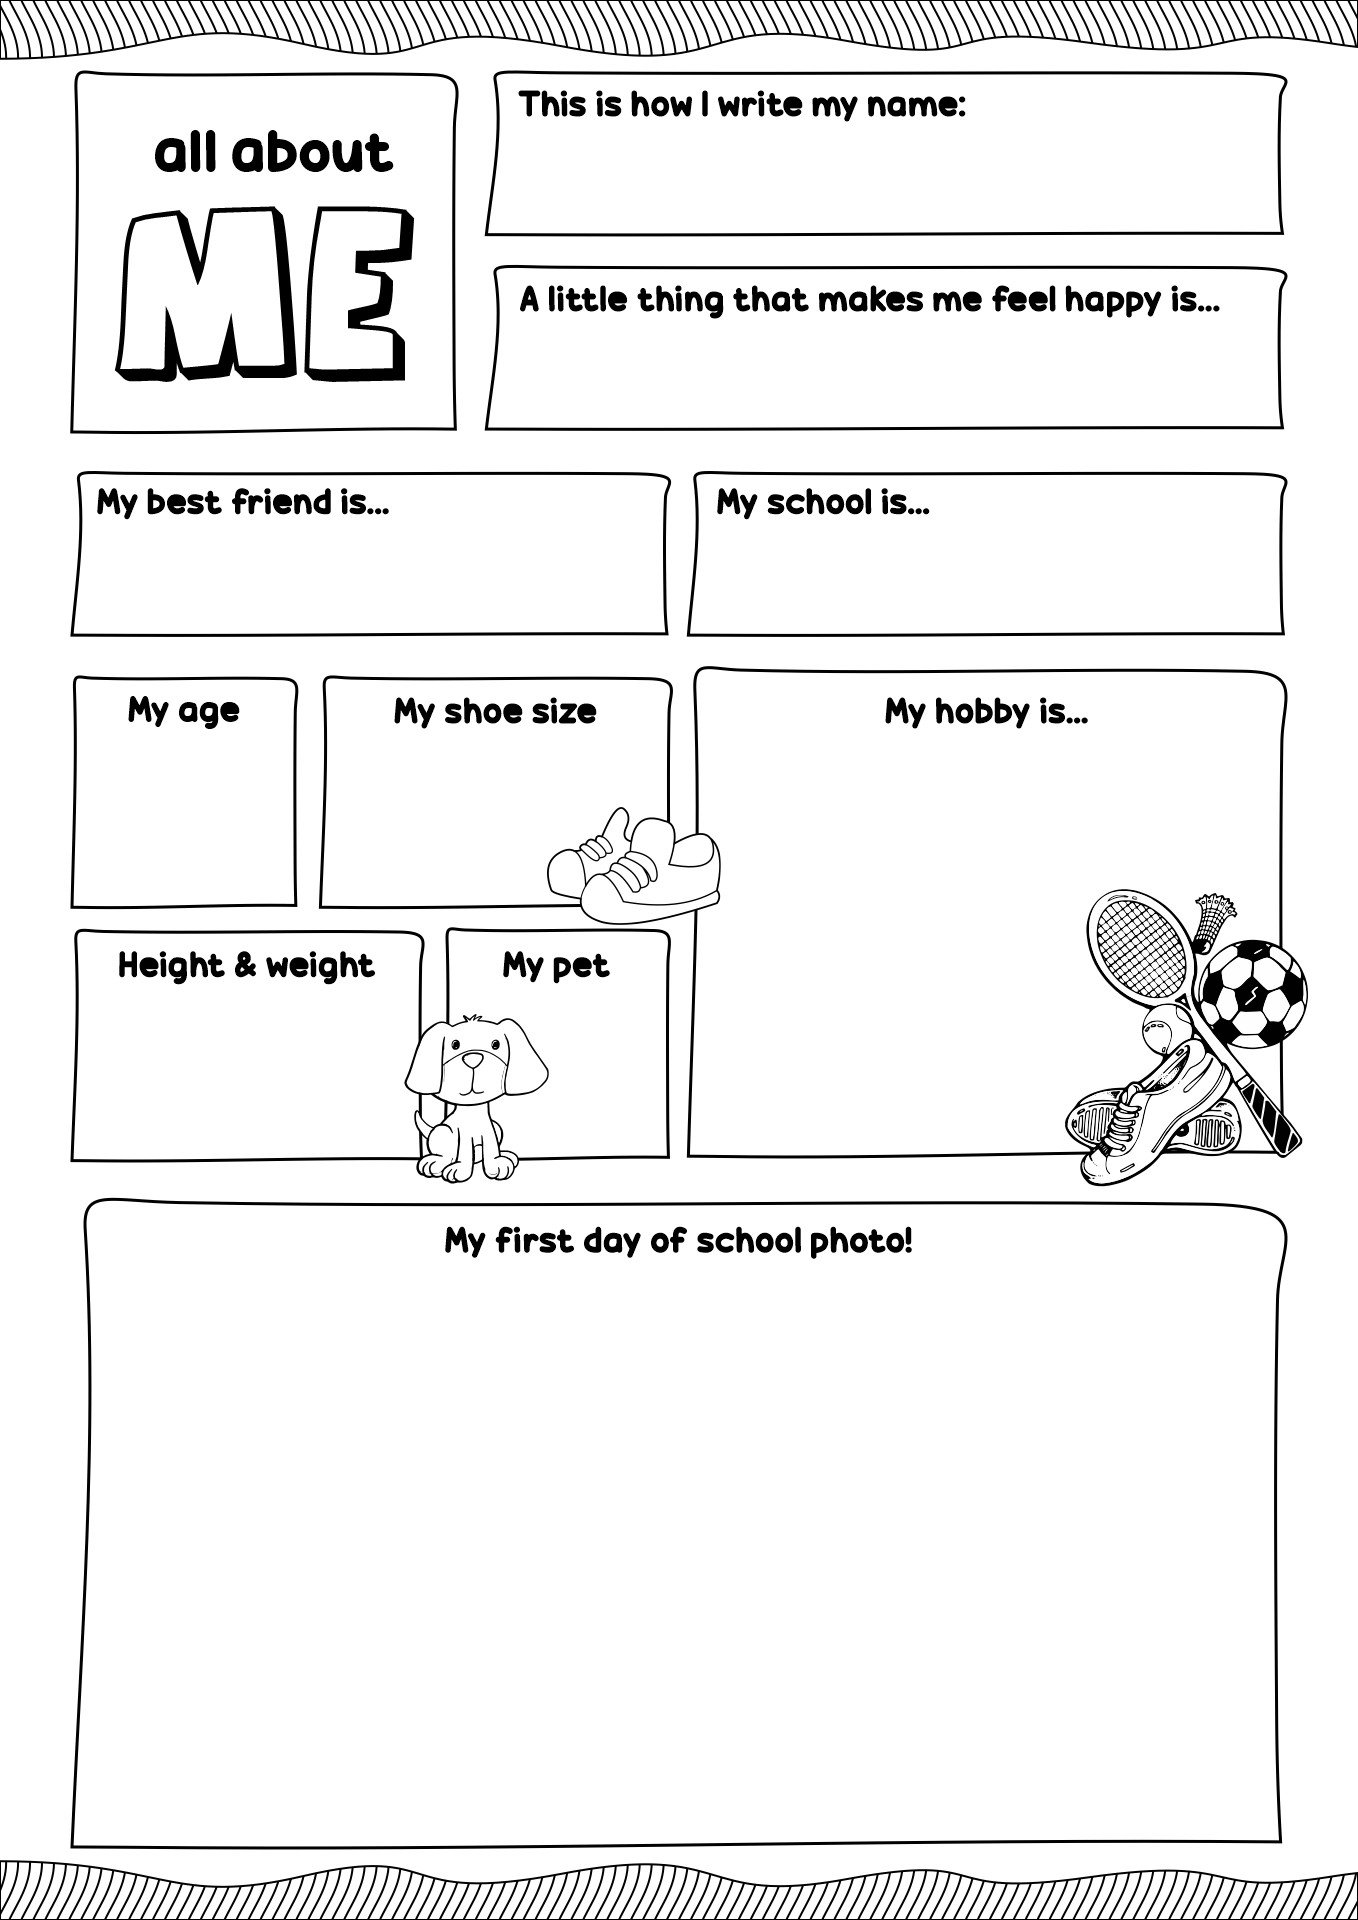 13-best-images-of-get-to-know-me-worksheet-get-to-know-you-worksheet